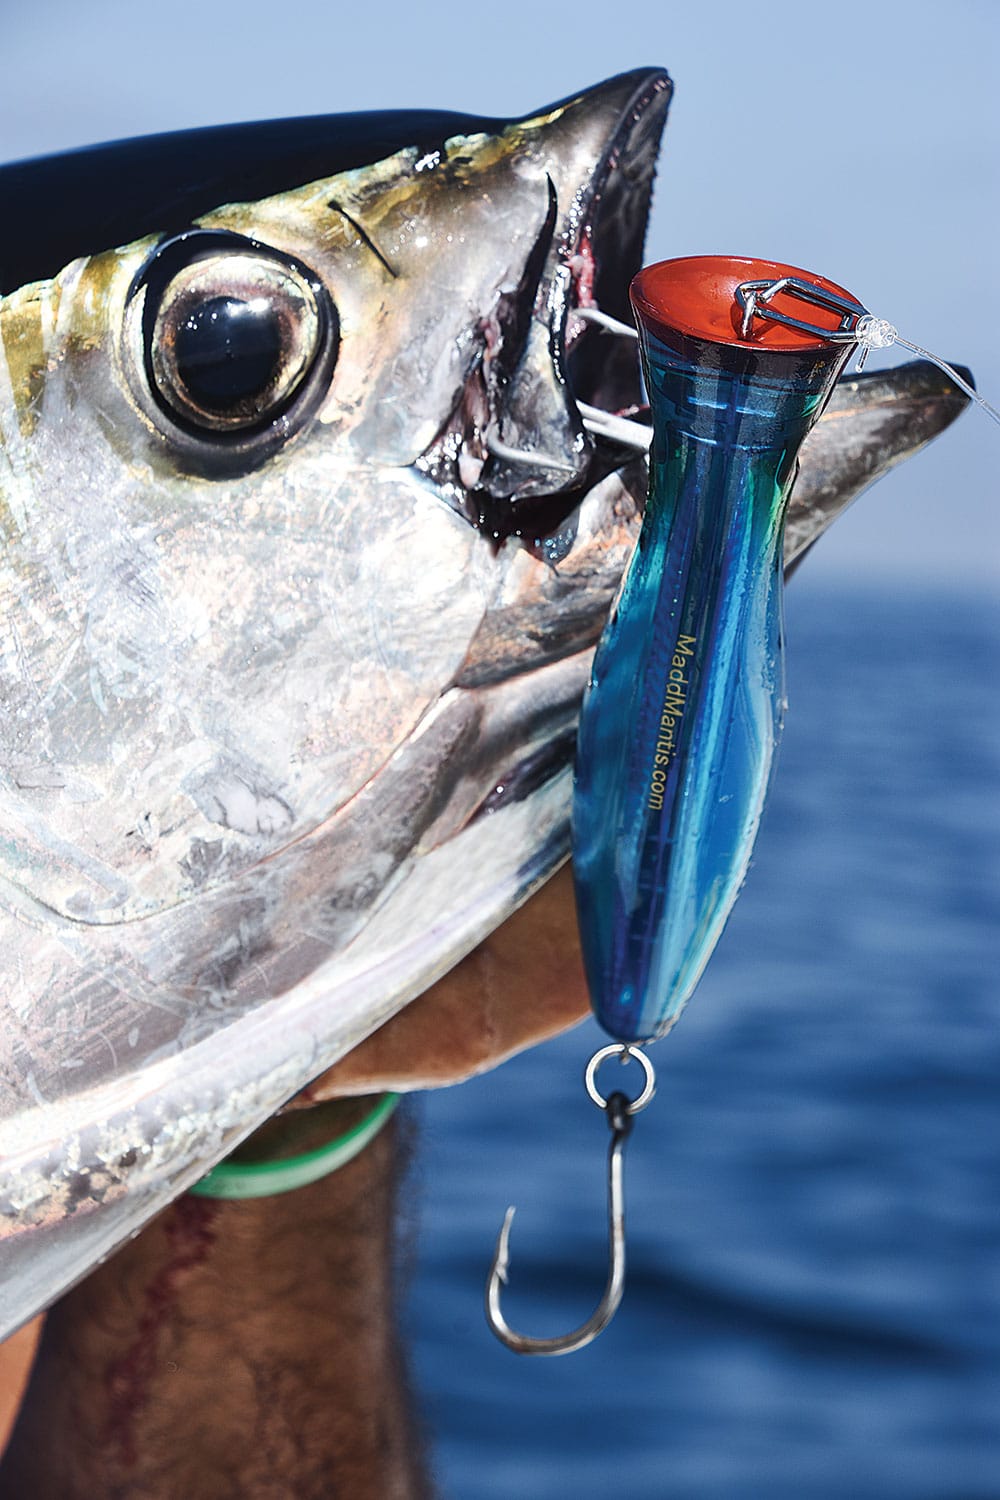 Our range of tuna lures has been nailing all kinds of tuna for